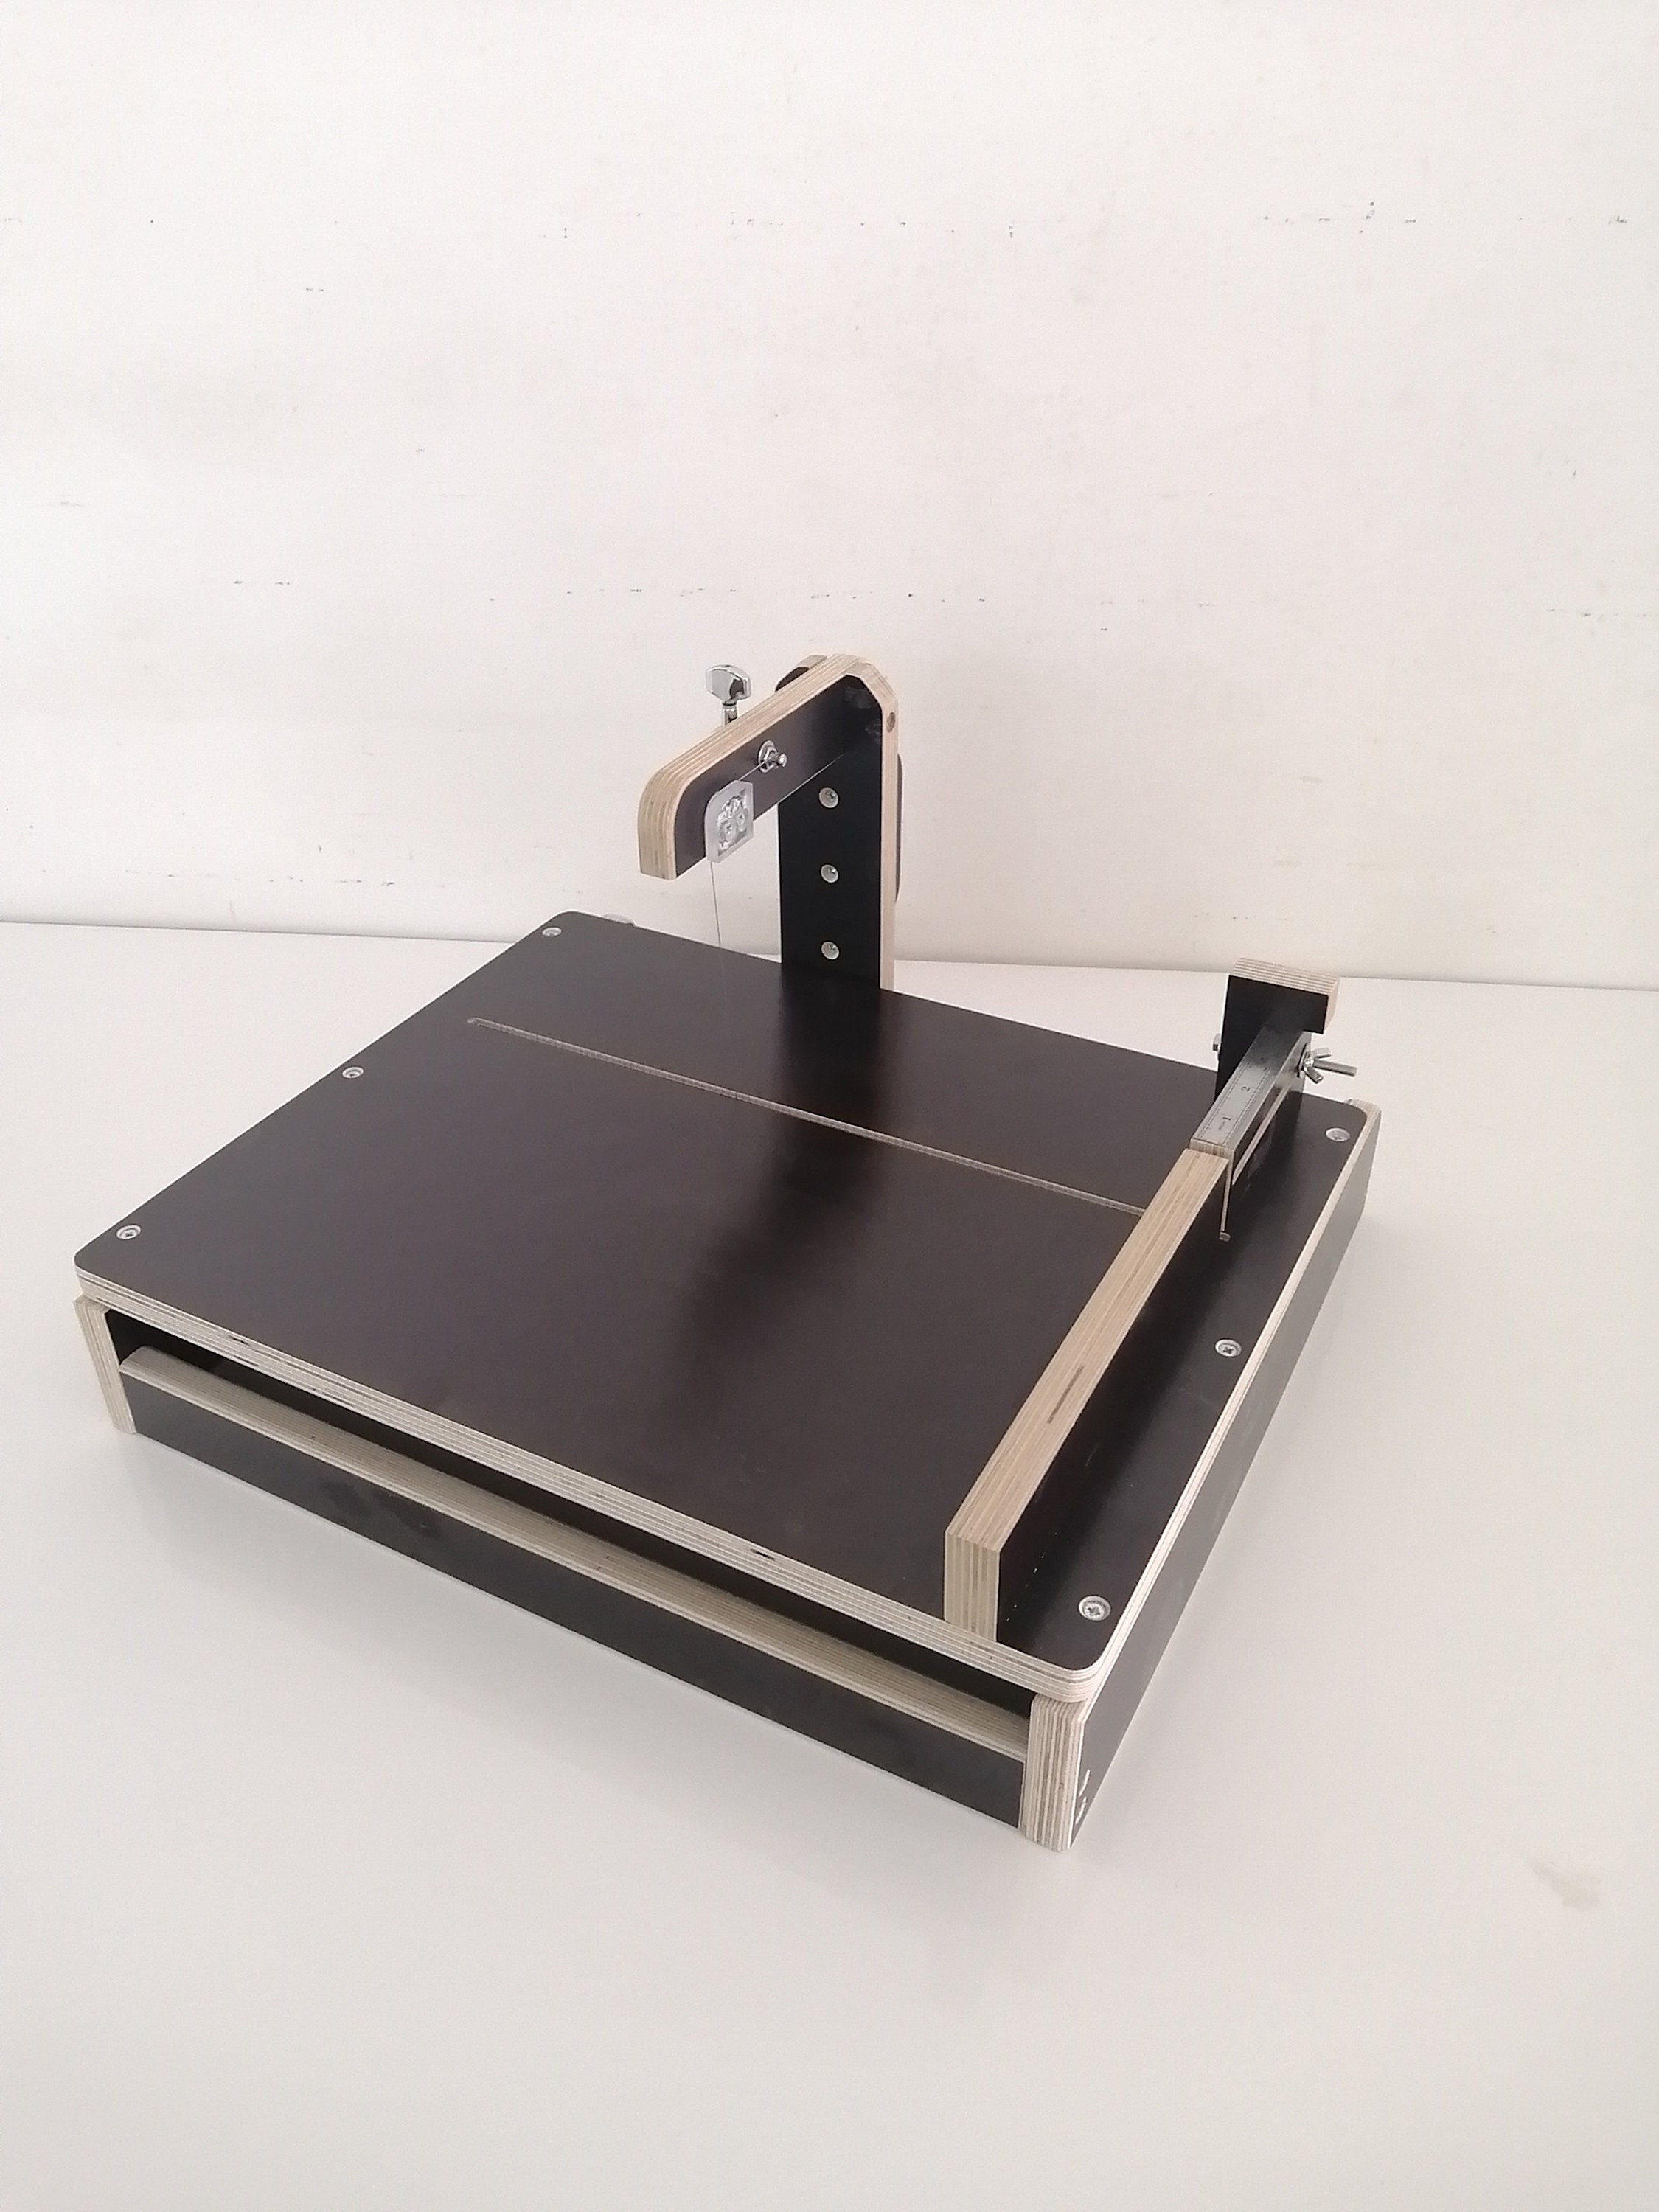 Slab Cutter, Soap Cutter (please read listing for processing times)